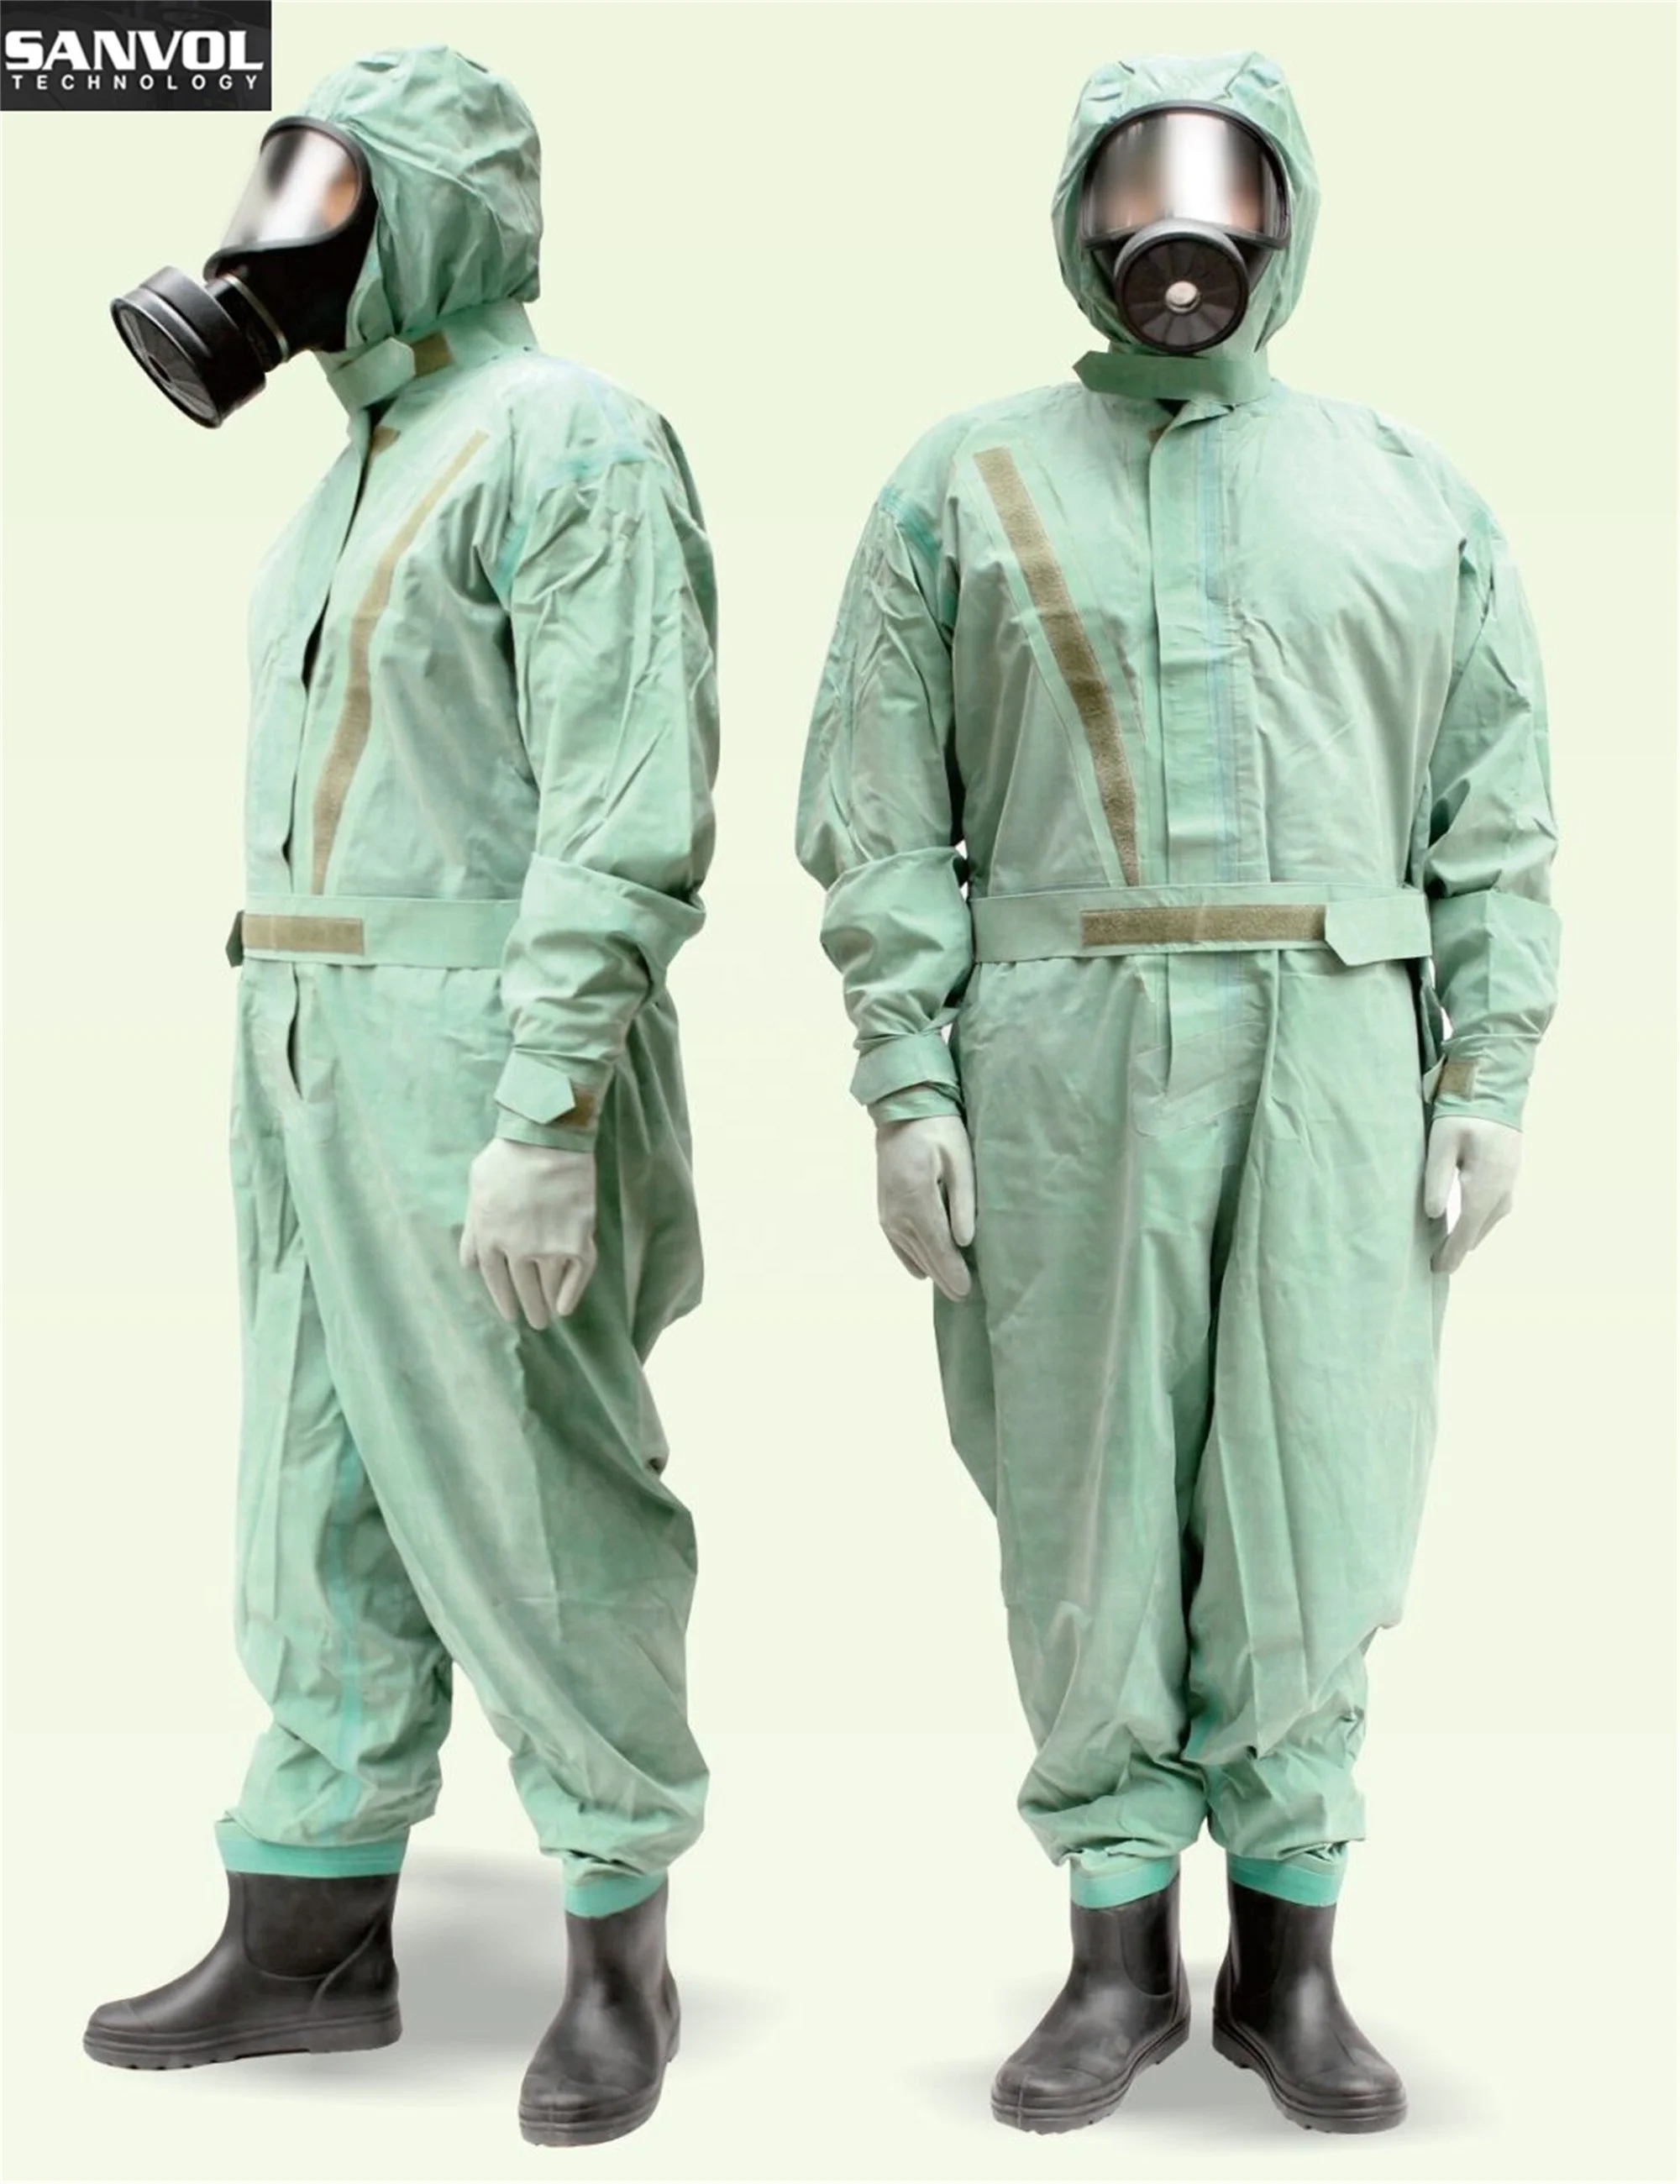 
NBC Chemical Protective Clothing safety clothing personal safety equipment 